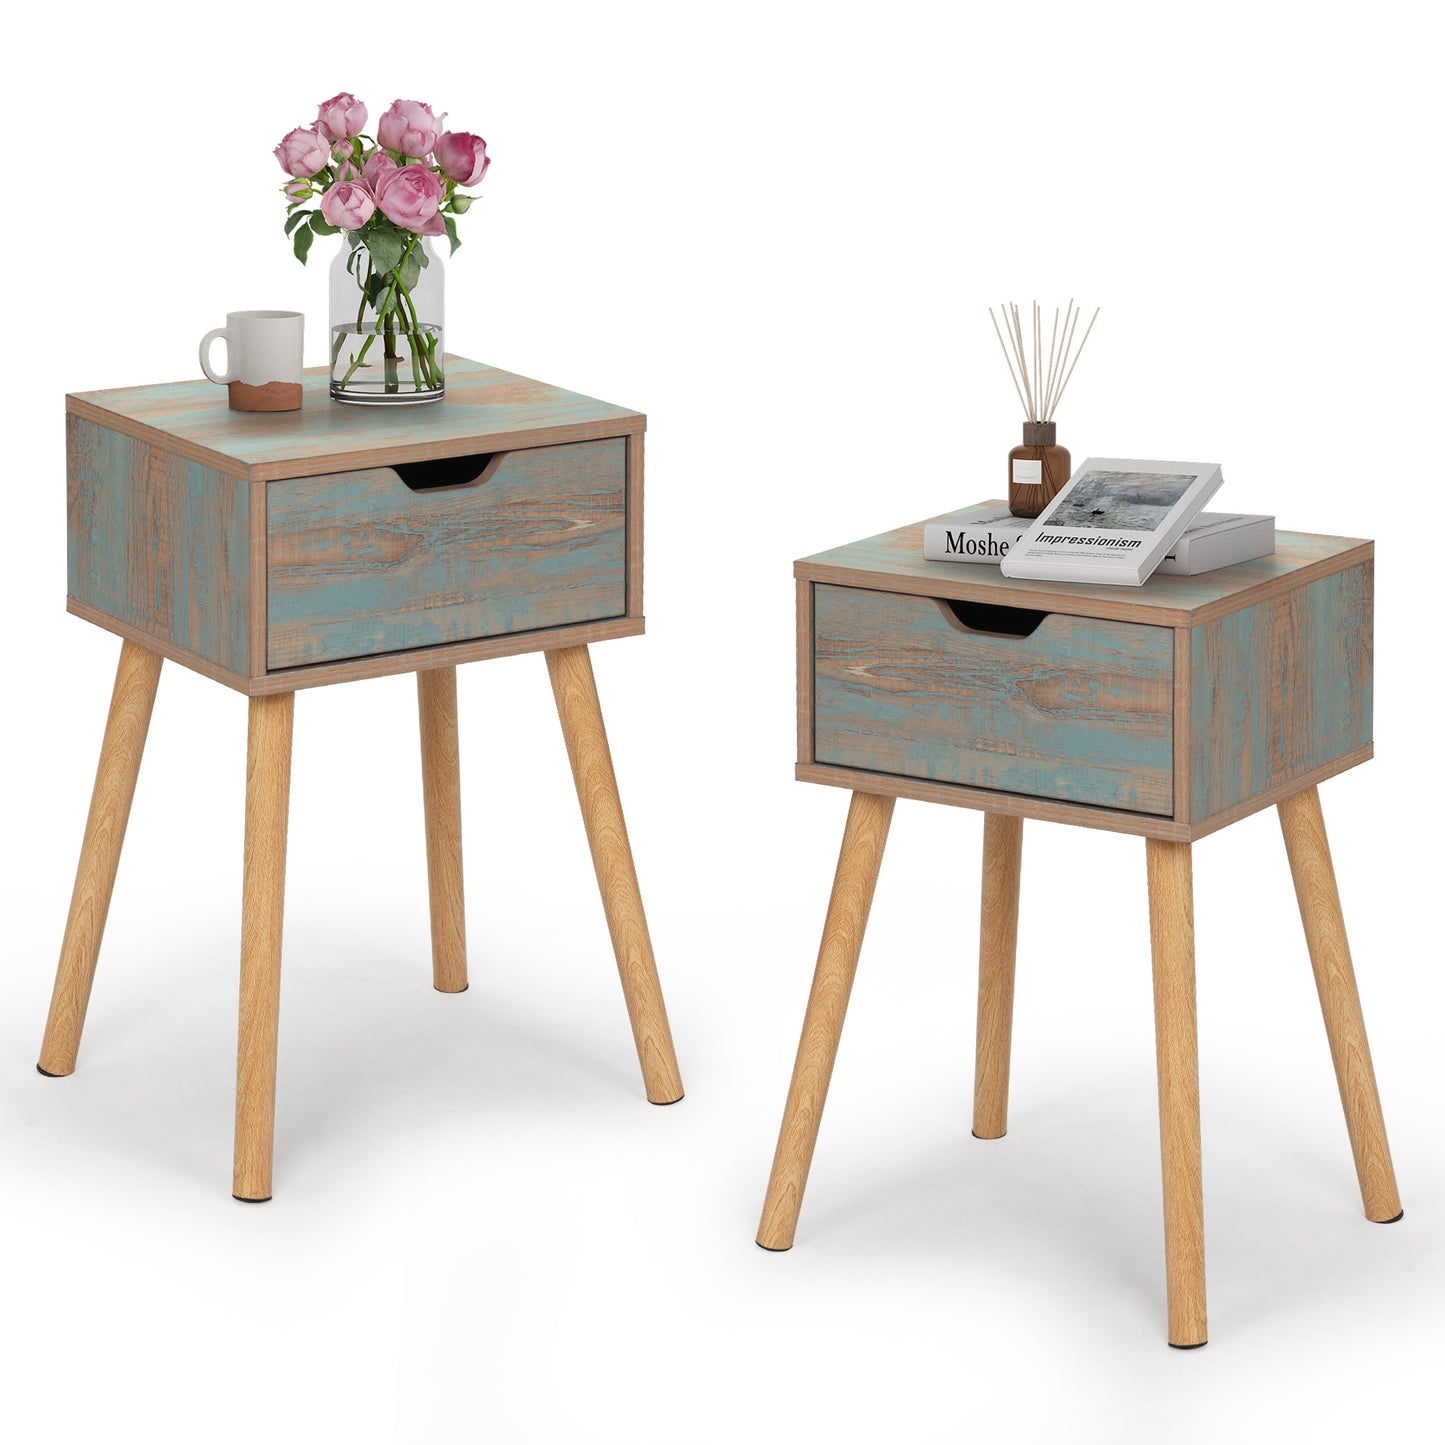 Set of 2, Wooden End Table with Storage Drawer